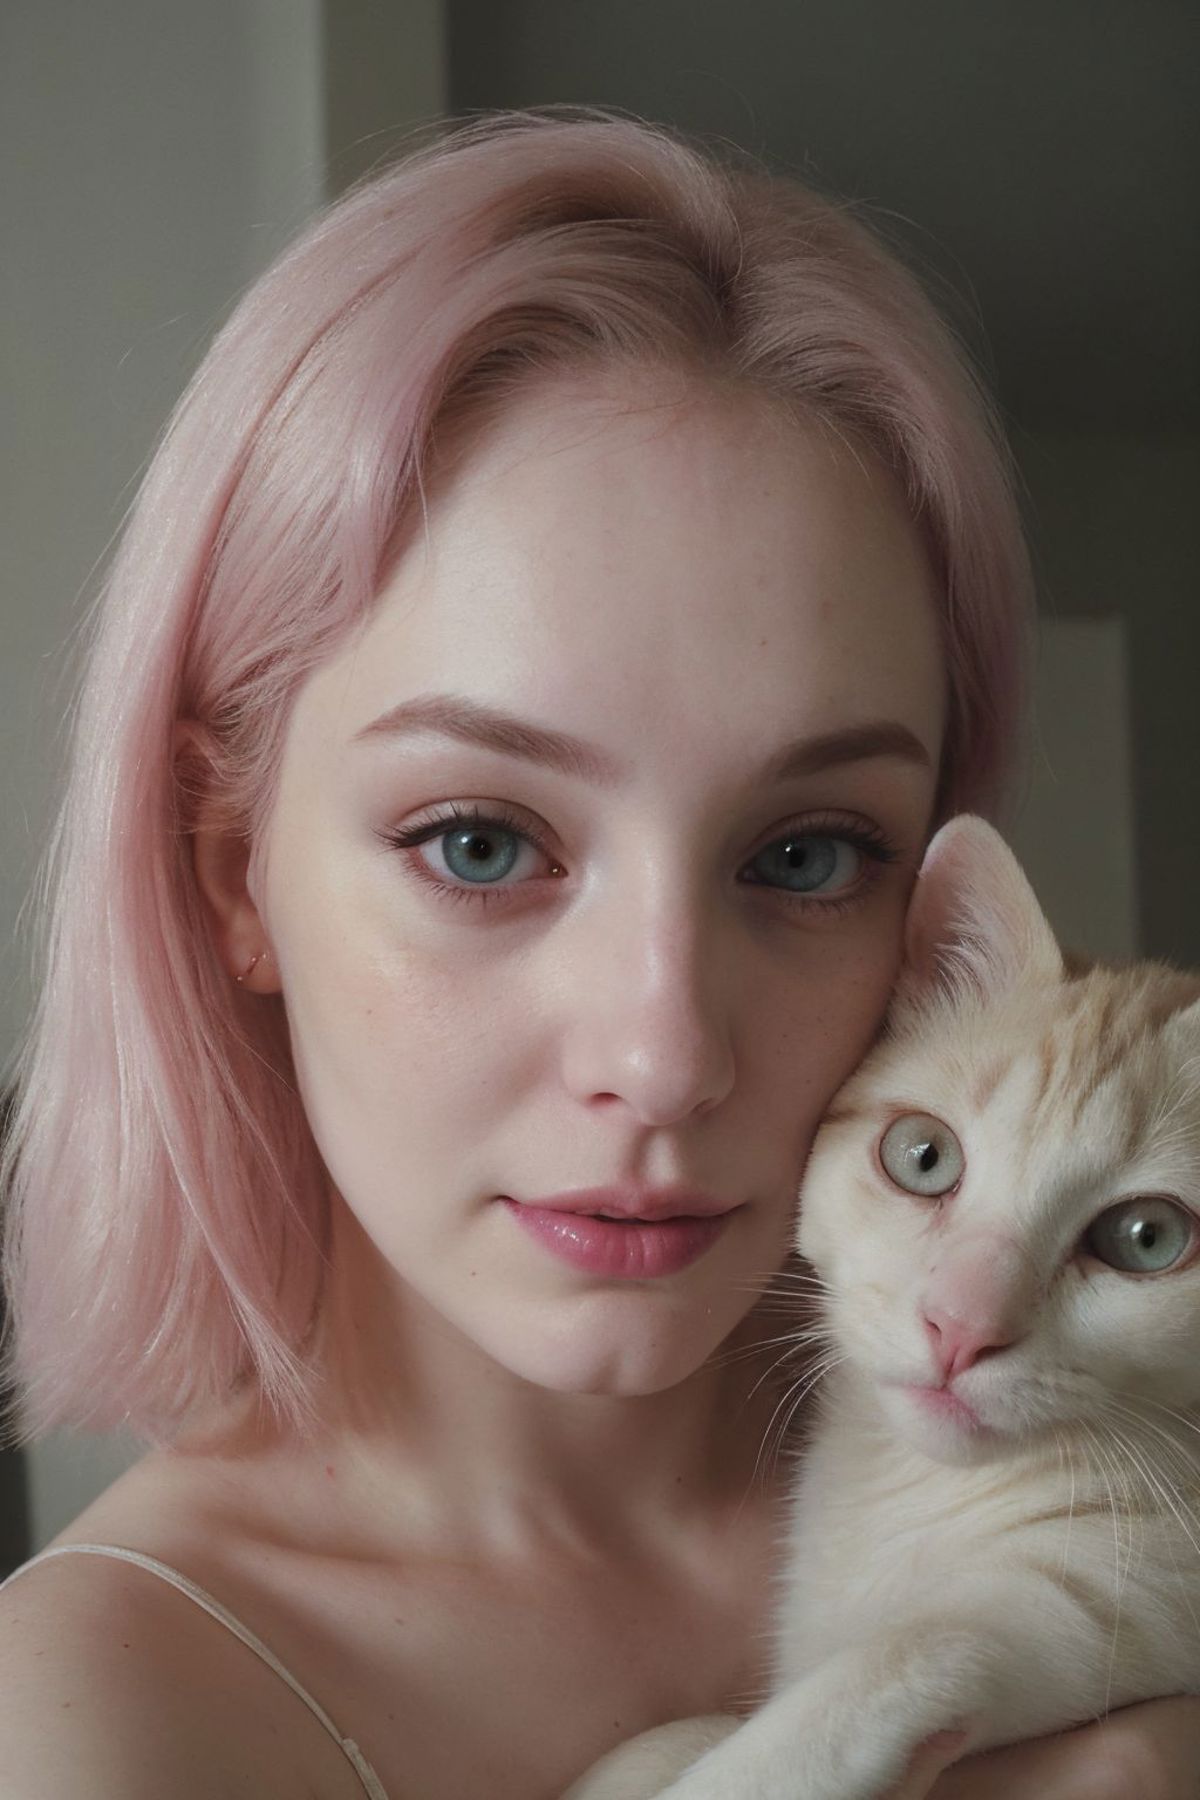 Woman with pink hair holding a white cat with green eyes.